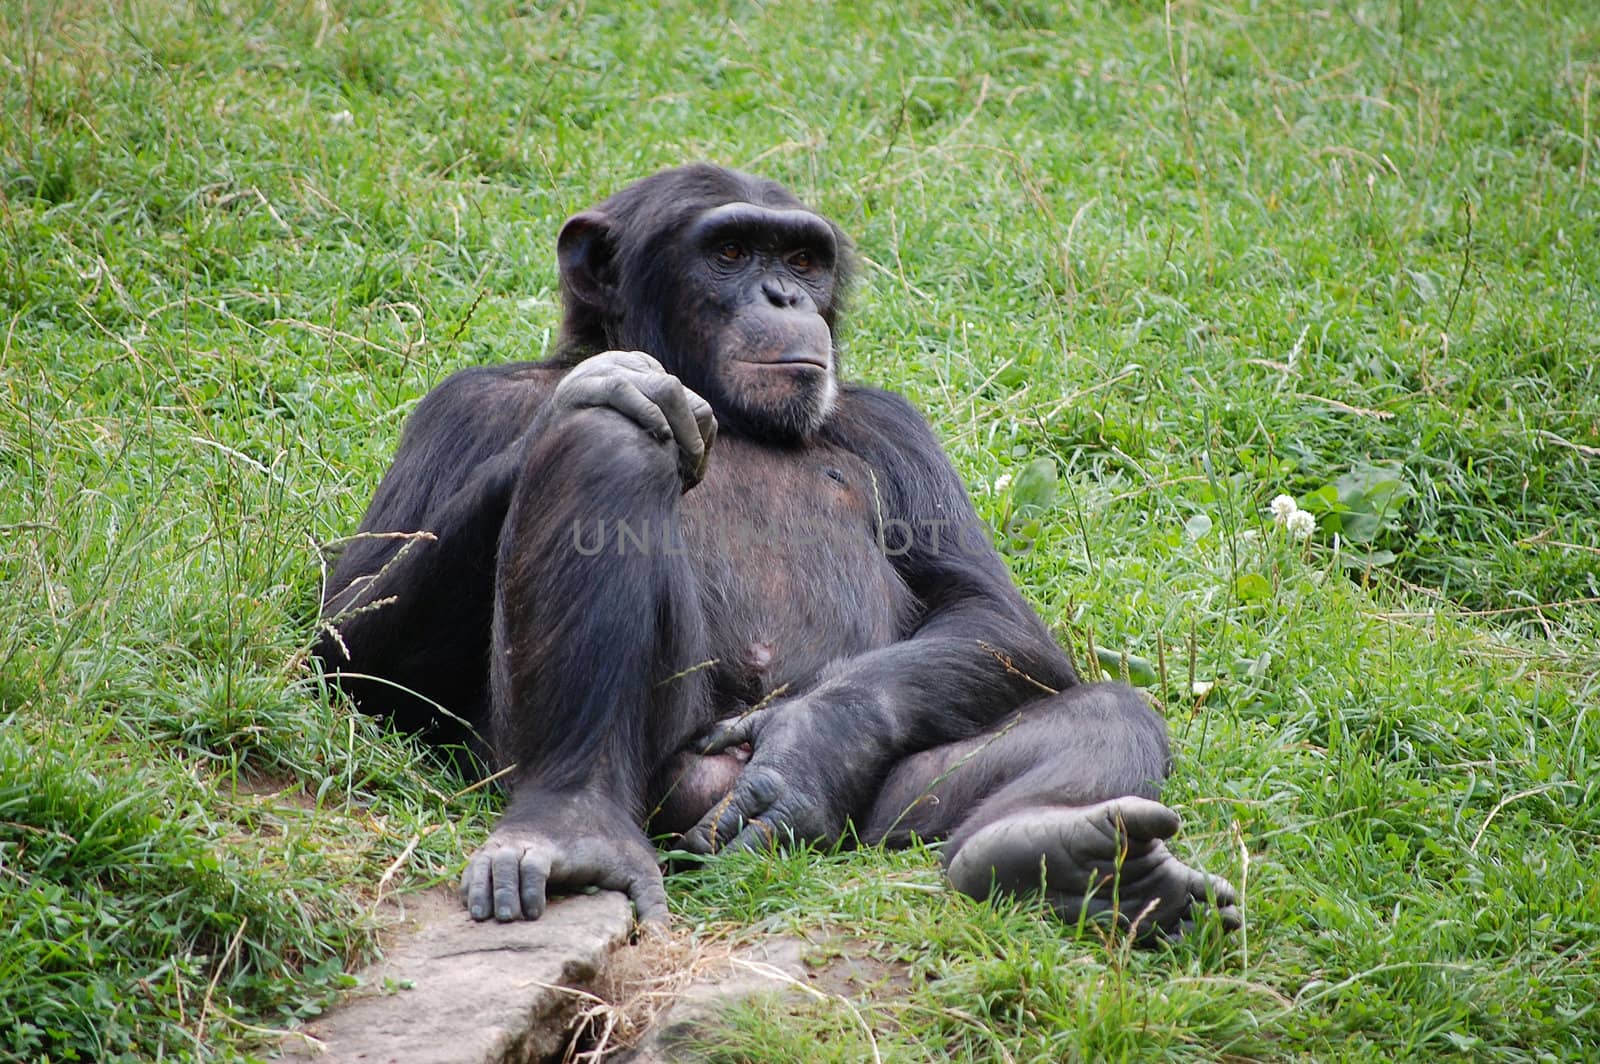 A chimp relaxing in the grass.